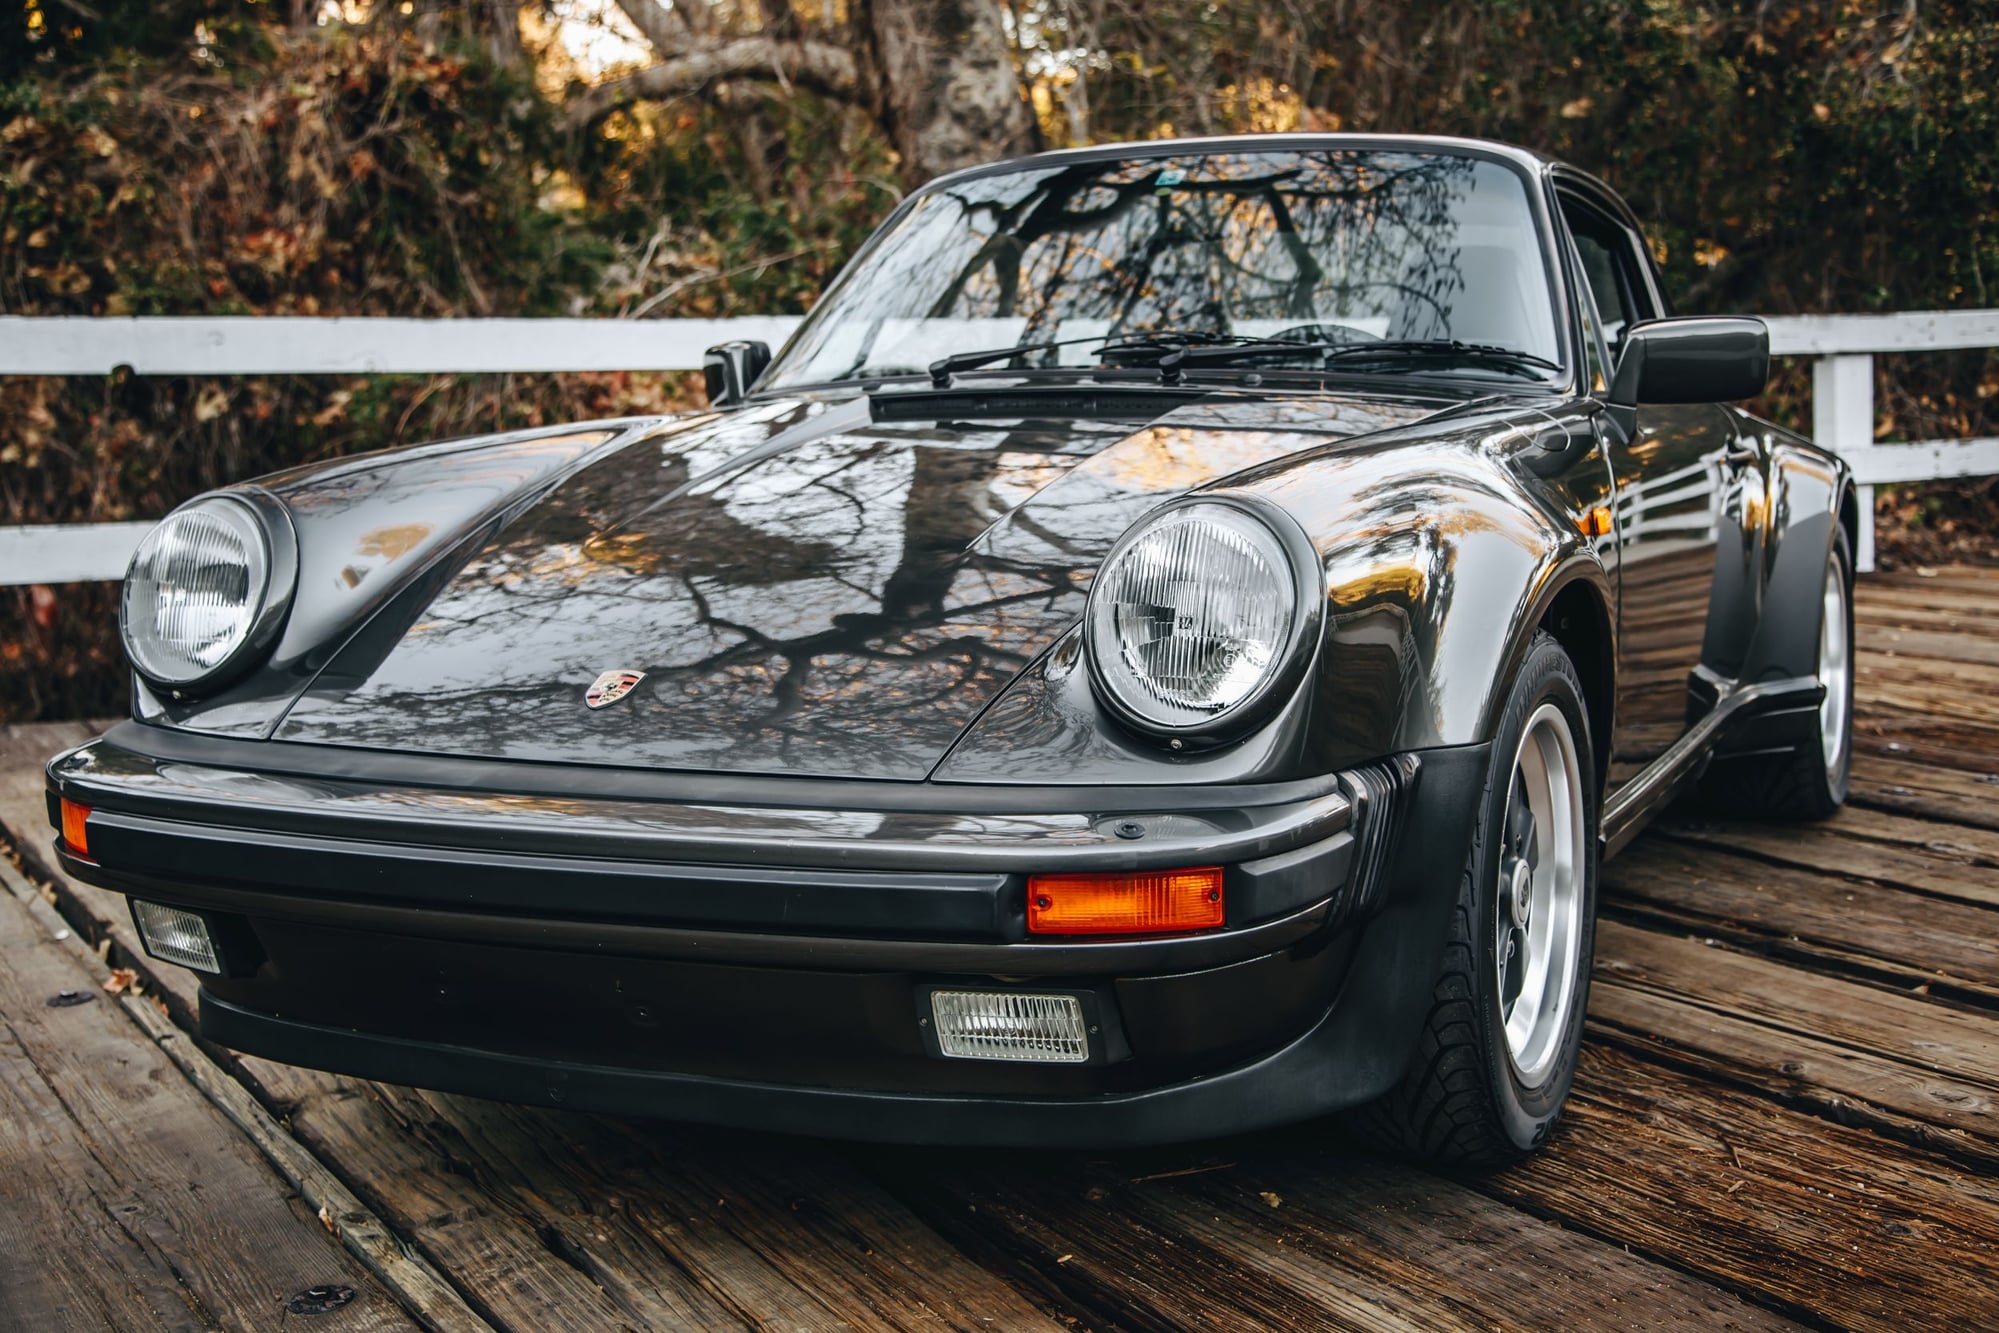 1989 Porsche 911 - 1989 Porsche 930 Turbo - Factory G50 5-Speed Transmission - Used - VIN WP0ZZZ93ZKS000192 - 40,300 Miles - 6 cyl - 2WD - Manual - Coupe - Gray - Fallbrook, CA 92028, United States